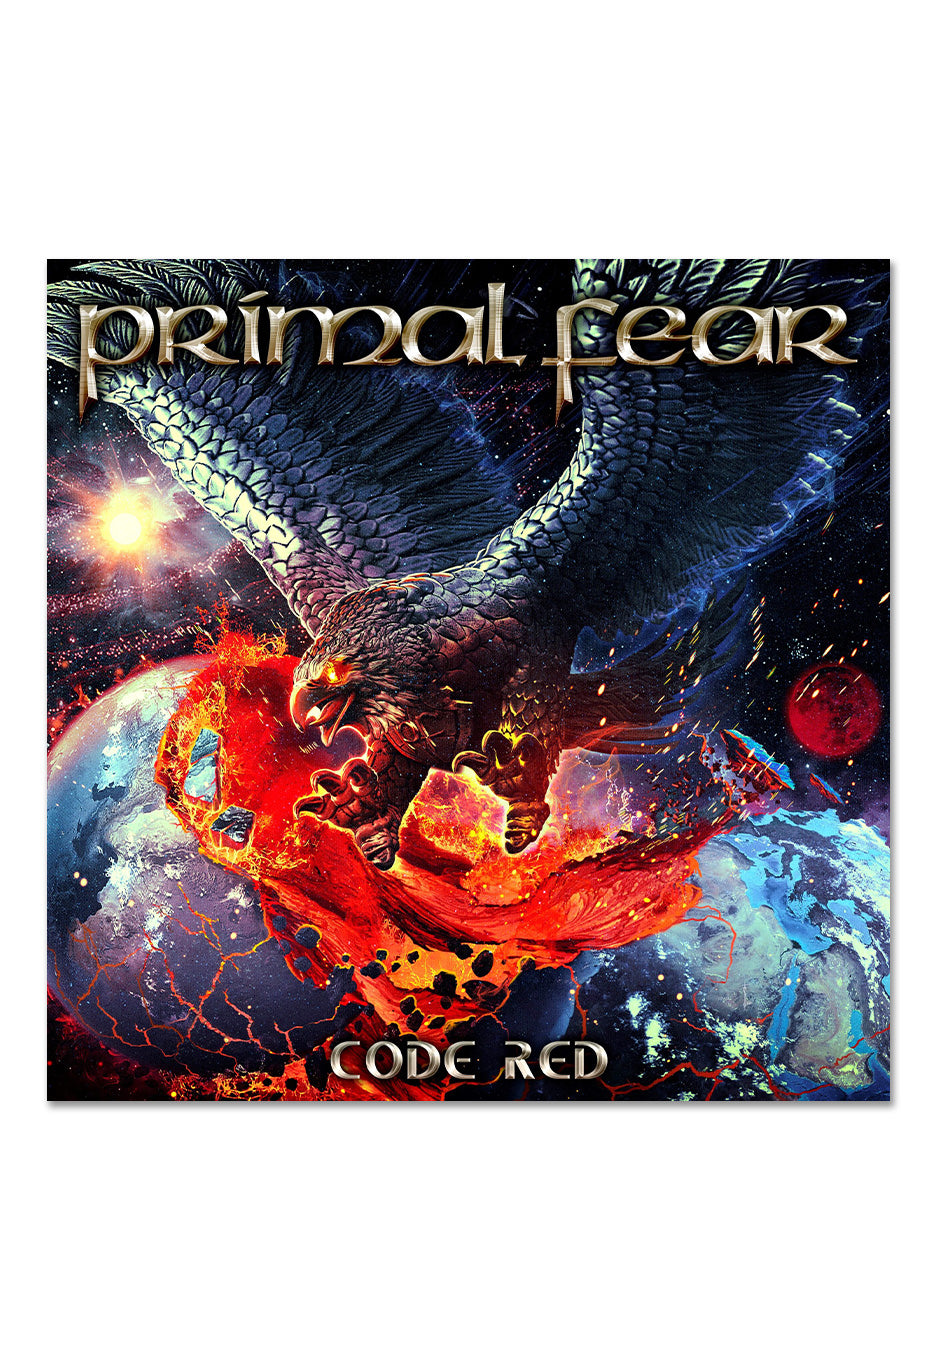 Primal Fear - Code Red Red - Colored 2 Vinyl